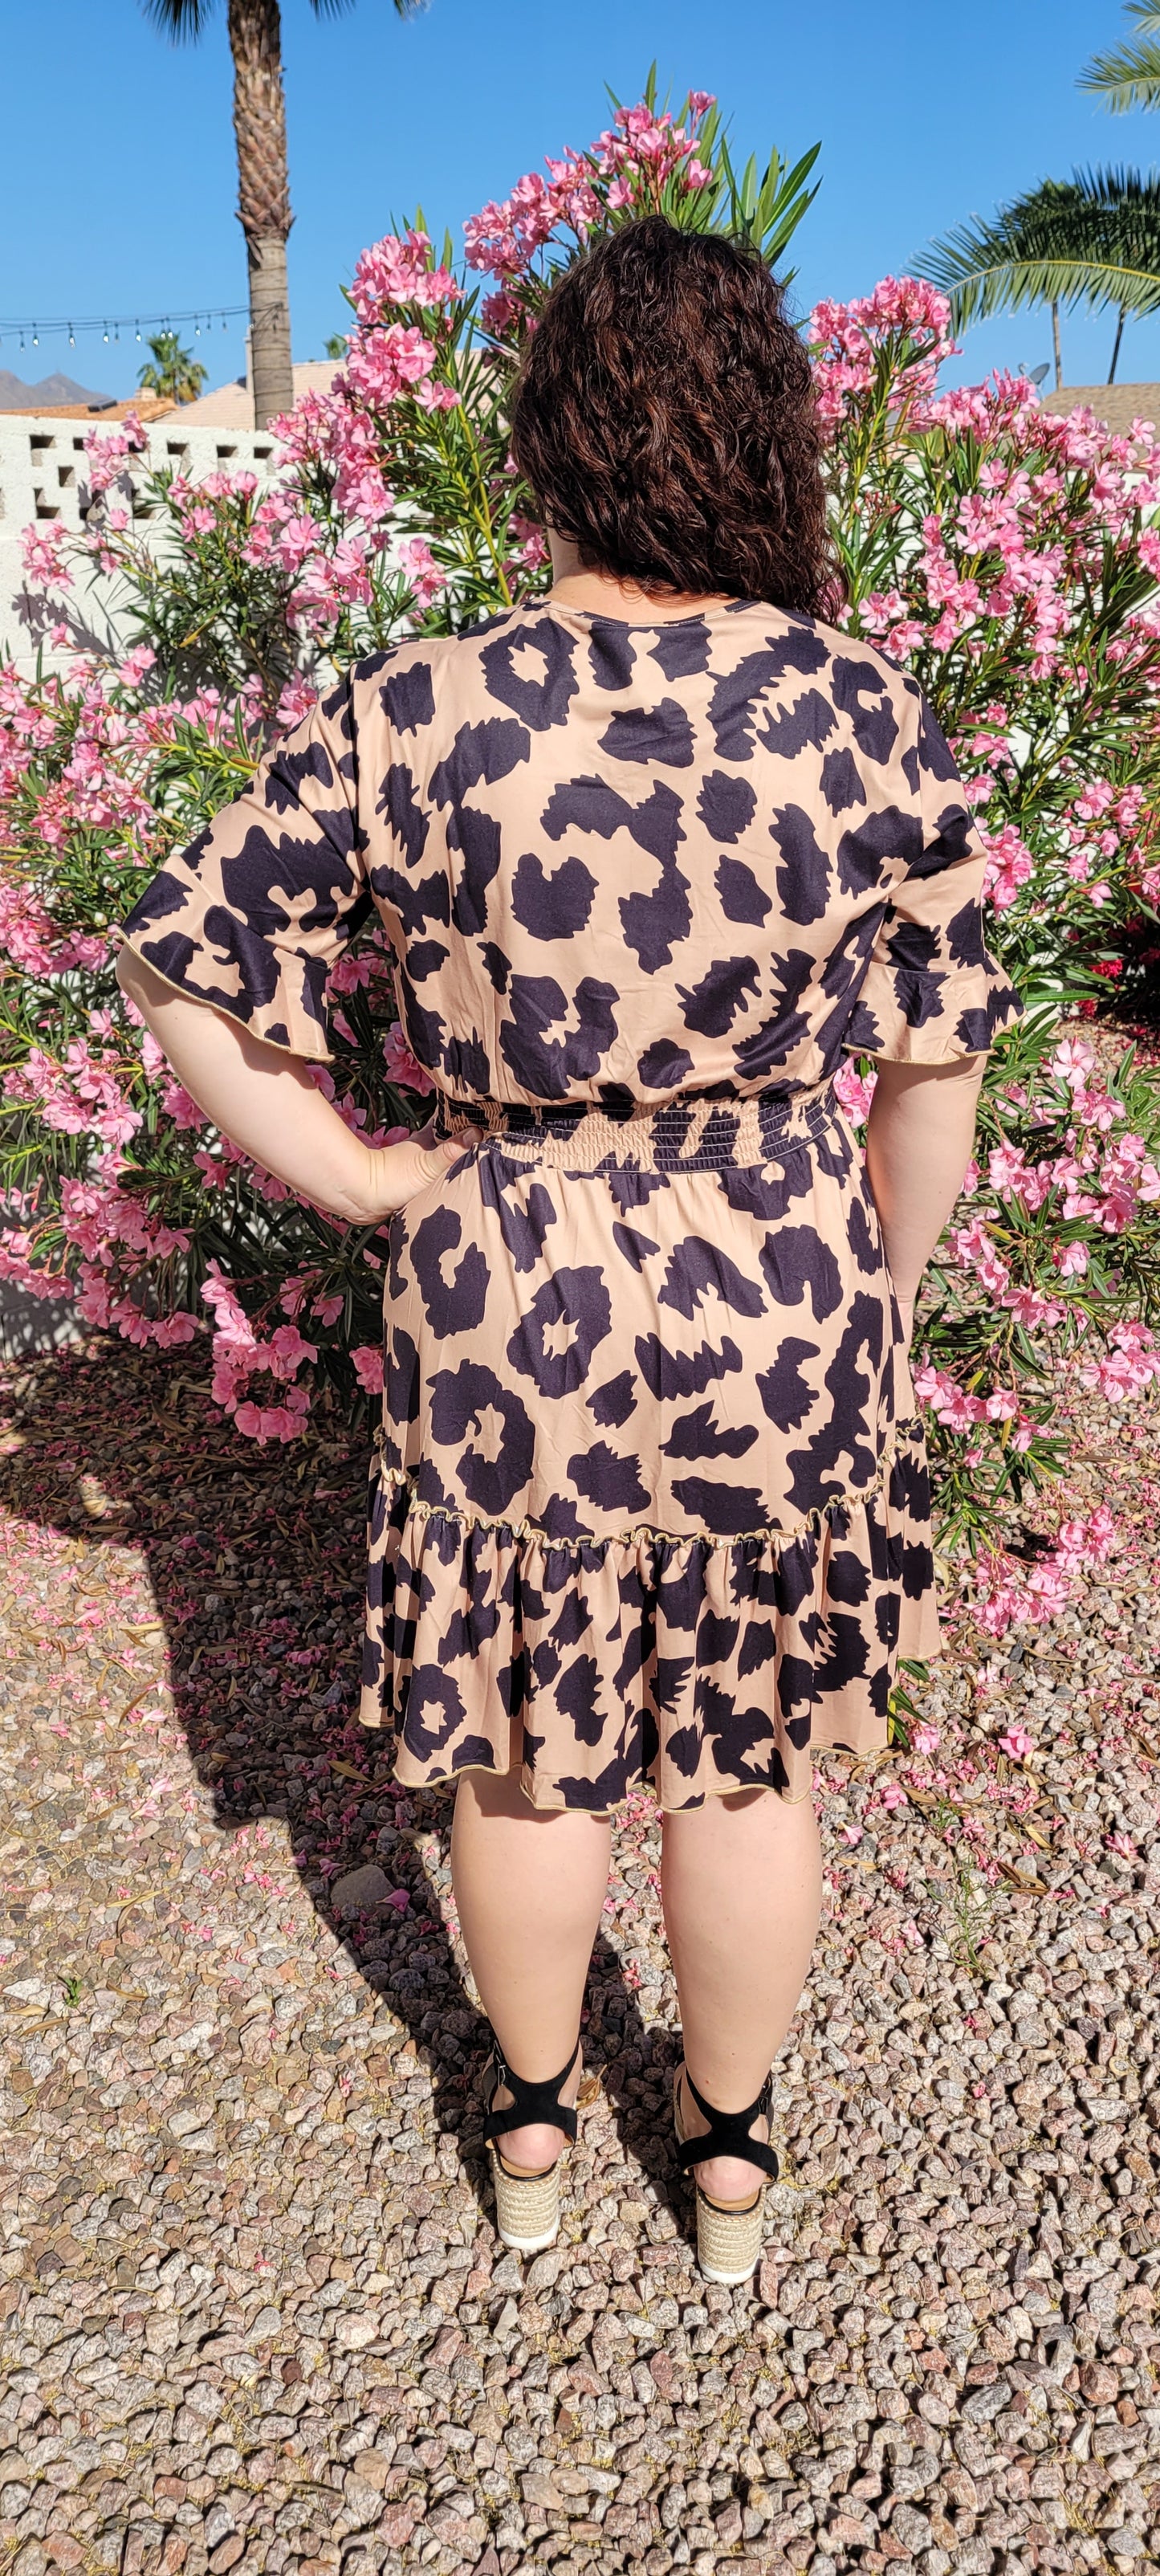 “The Wild Side” is a camel and black colored dress. This dress features a buttery soft animal print, v-neck, elastic cinched waistband, short bell sleeves with ruffles, and ruffle hemline. It sits above the knee. This dress is just as cozy as pajamas! Sizes small through large